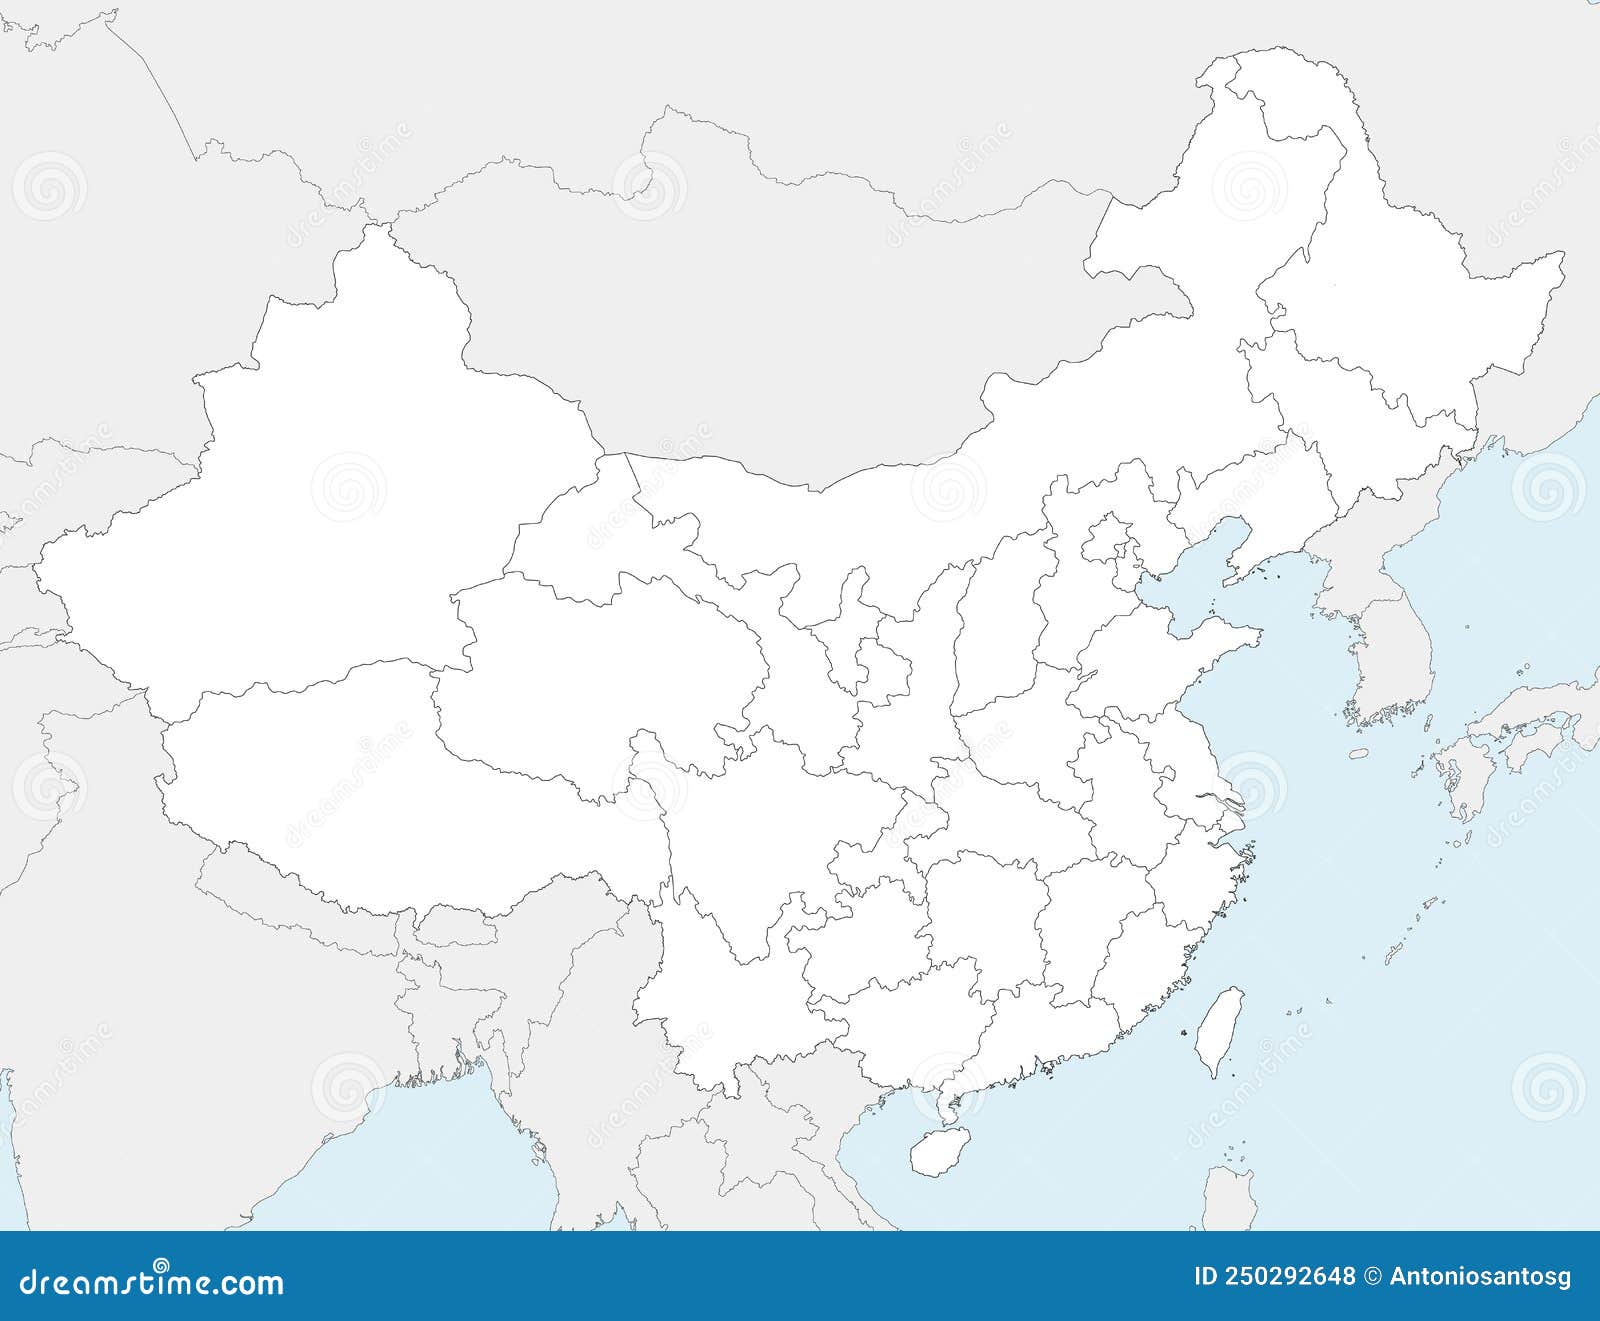  blank map of china with provinces, regions and administrative divisions, and neighbouring countries.